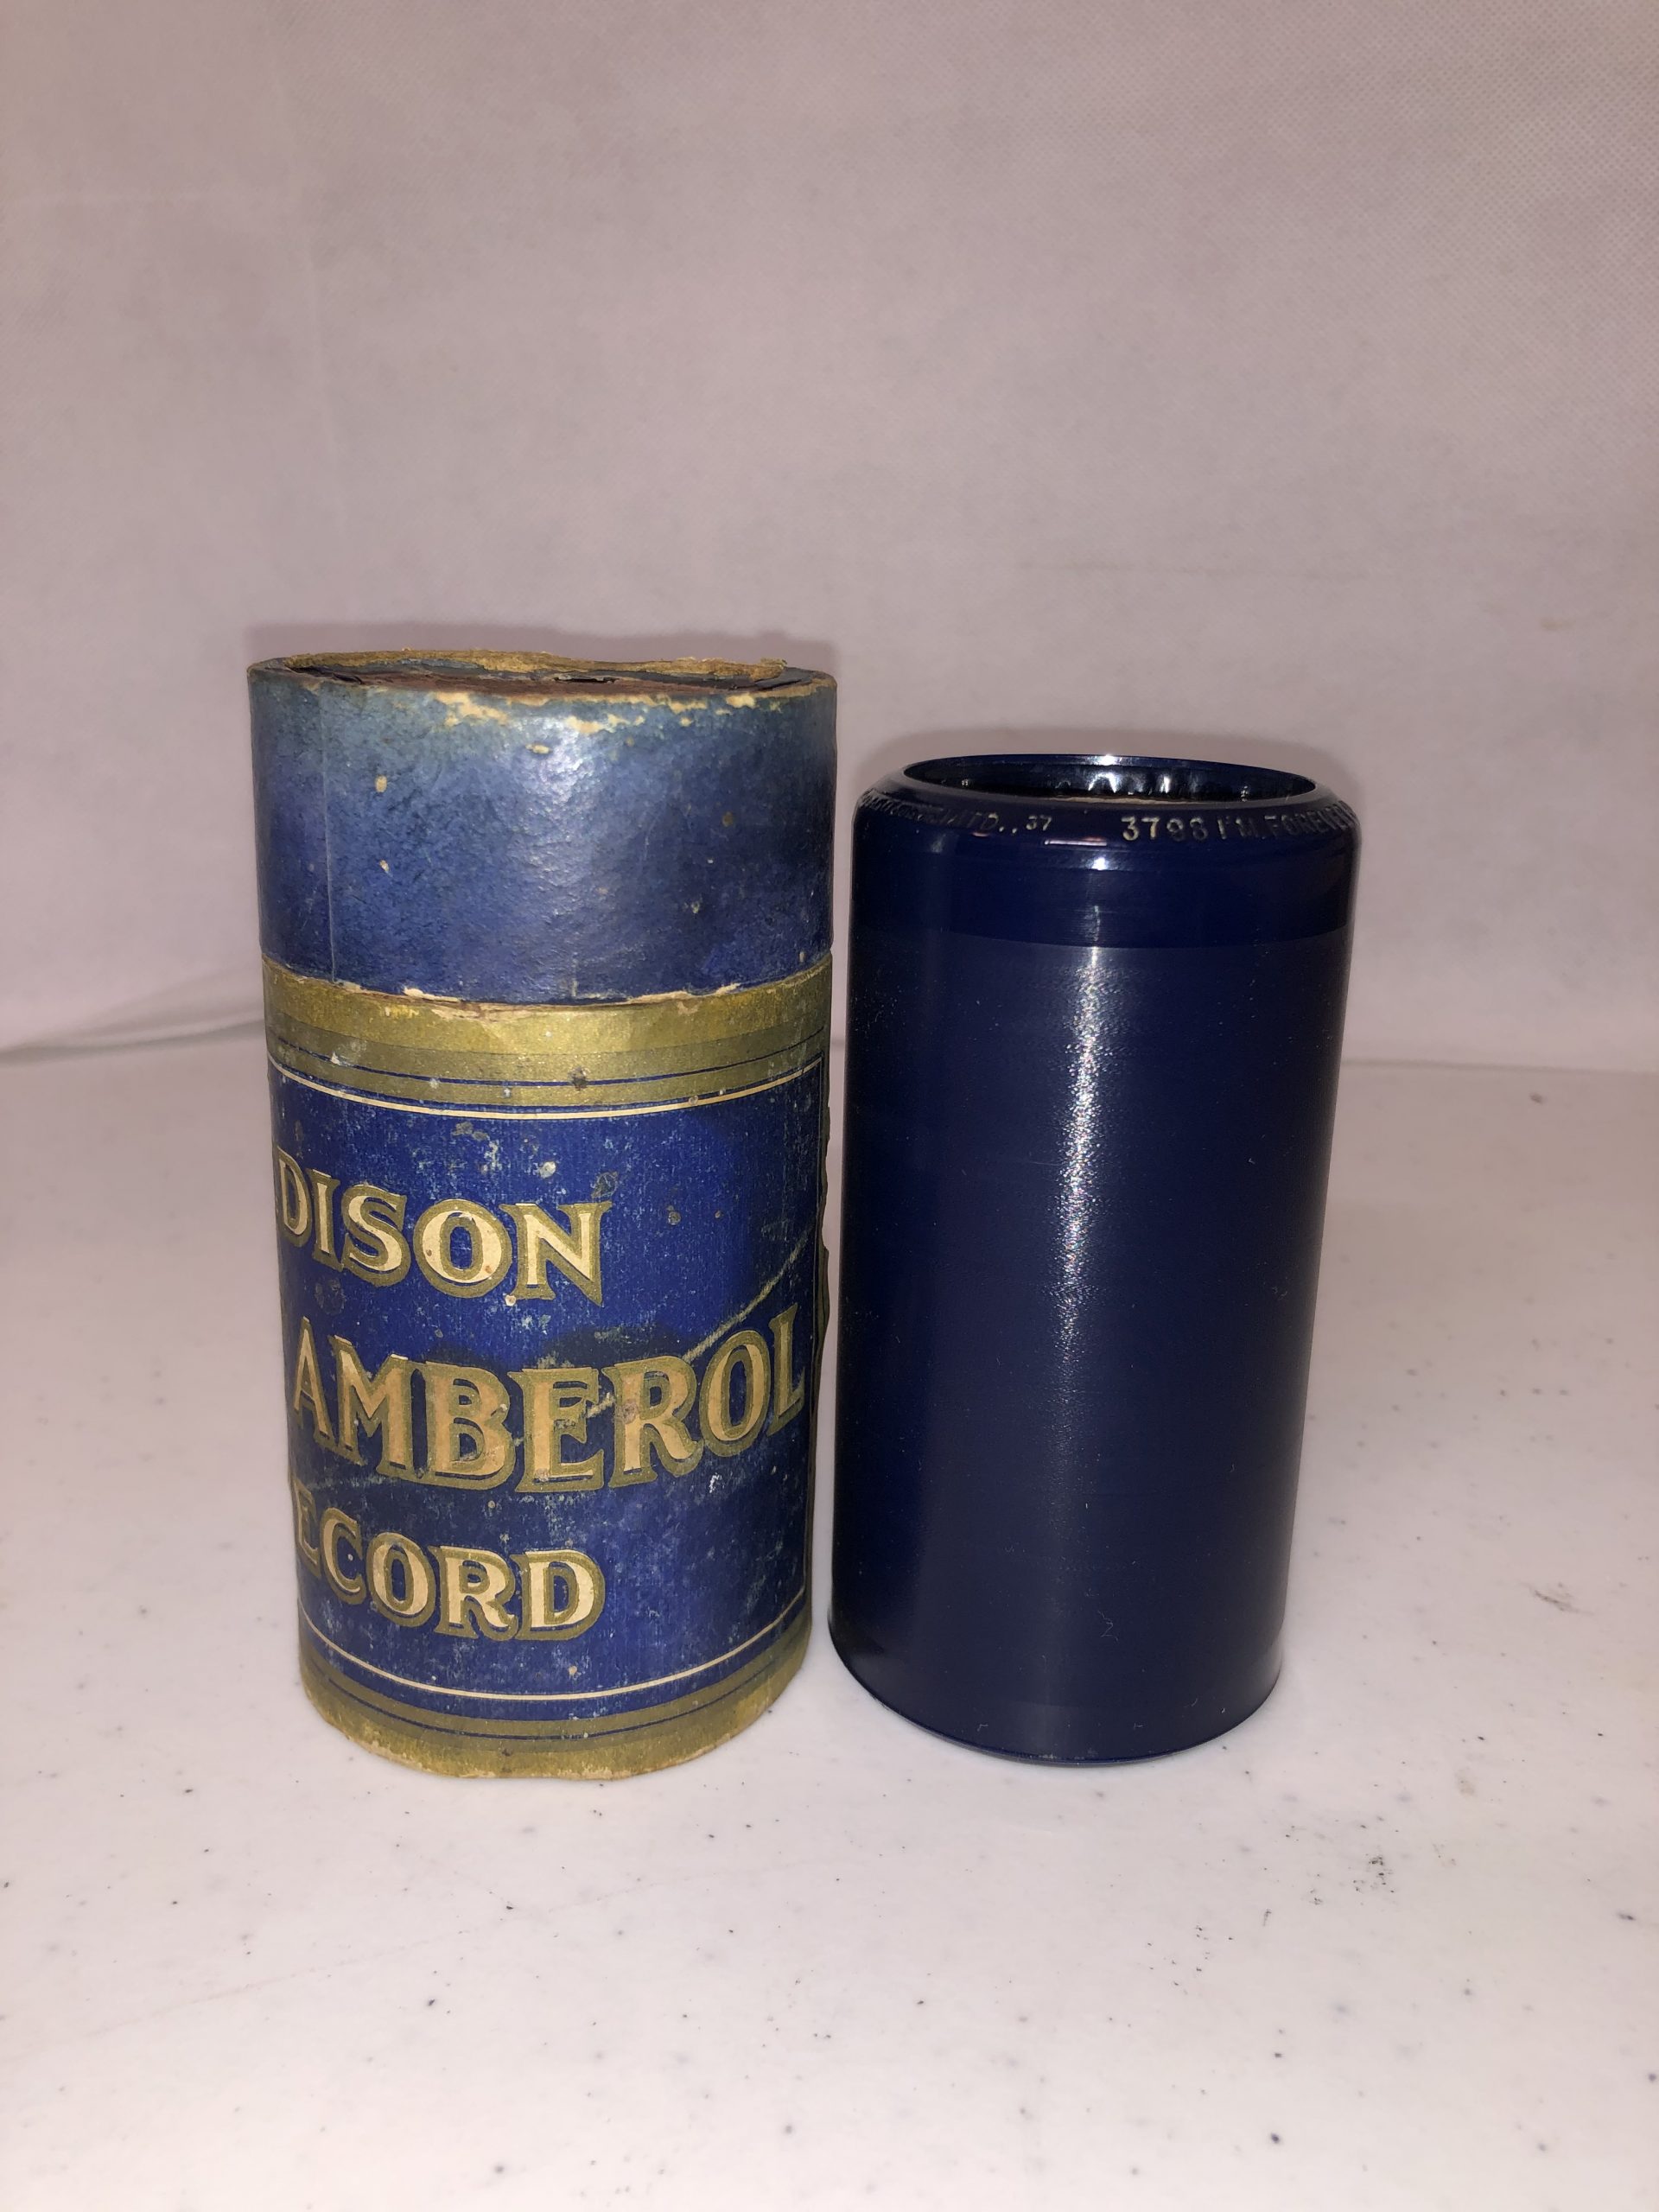 Edison 4 minute Cylinder…”All Aboard for Dixie Land – High Jinks”